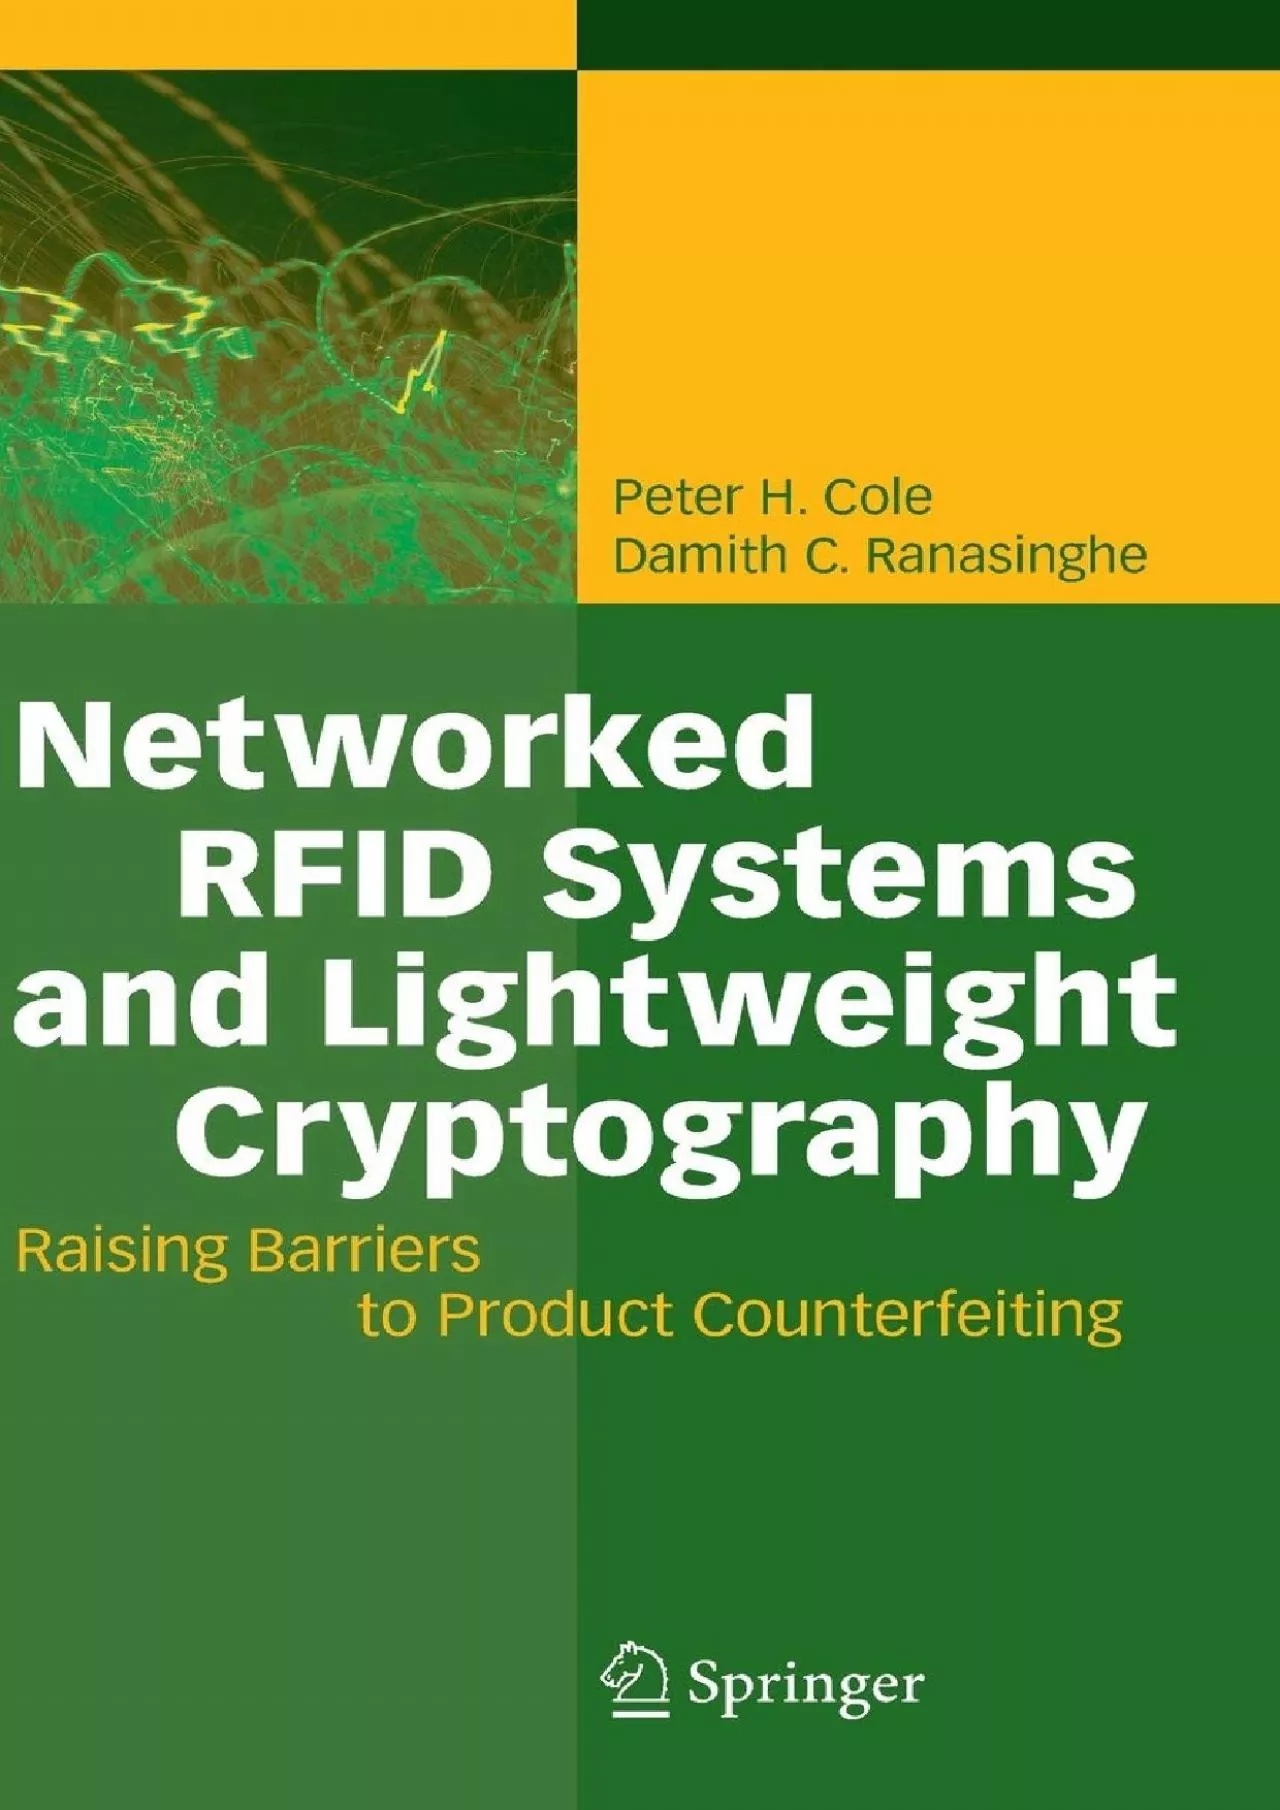 (BOOK)-Networked RFID Systems and Lightweight Cryptography: Raising Barriers to Product